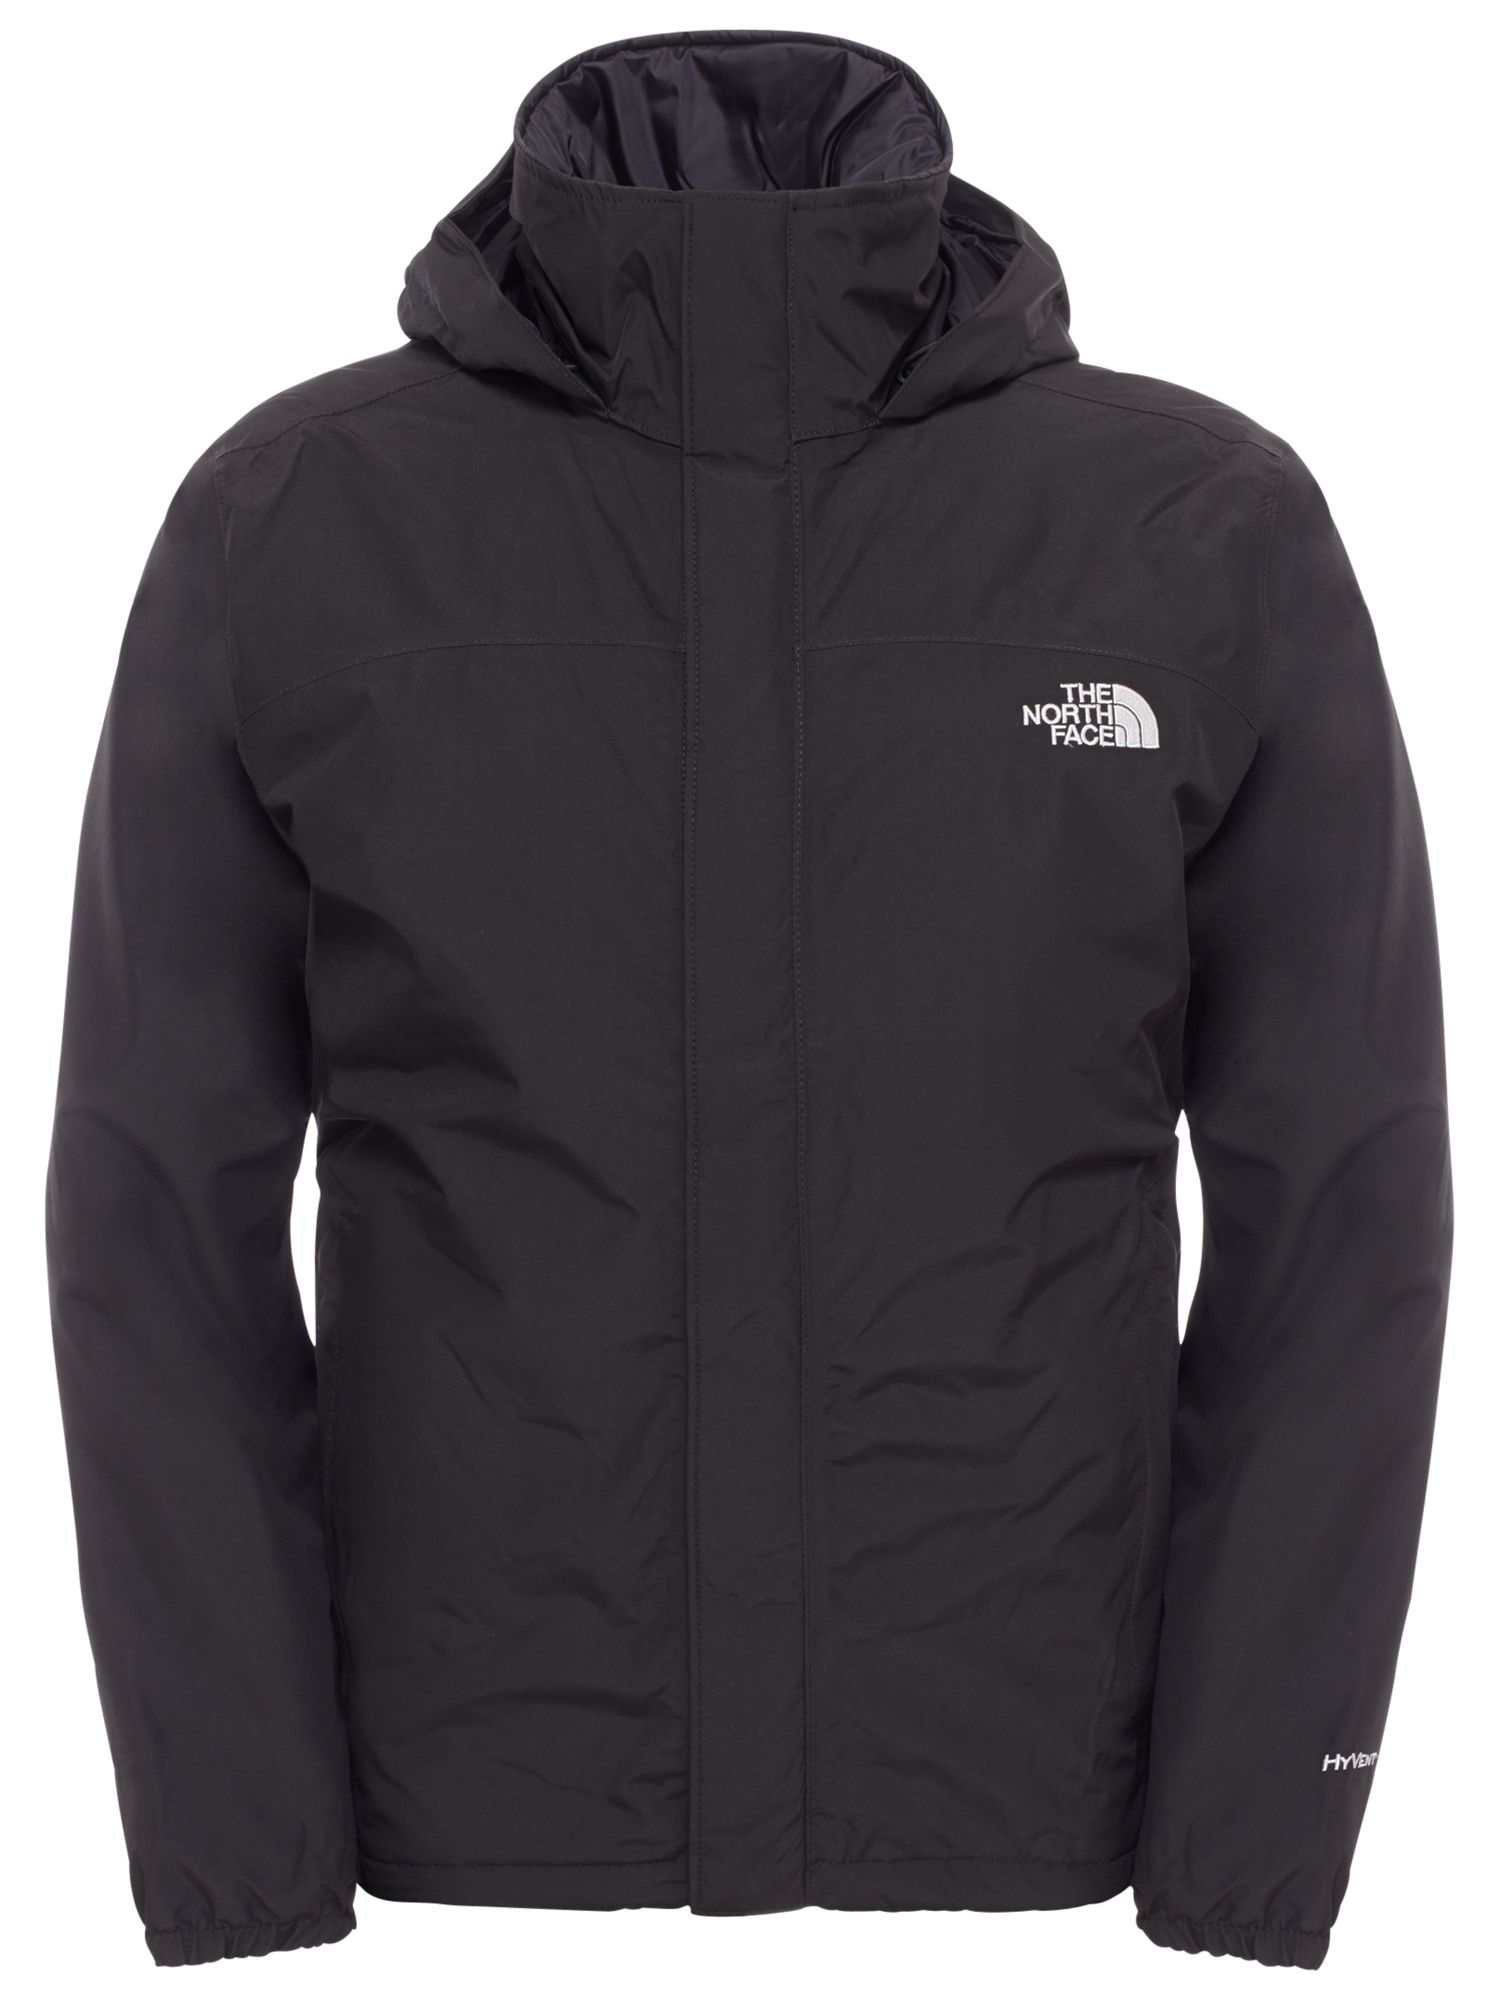 The North Face Resolve Insulated Waterproof Men's Jacket, Black at John ...